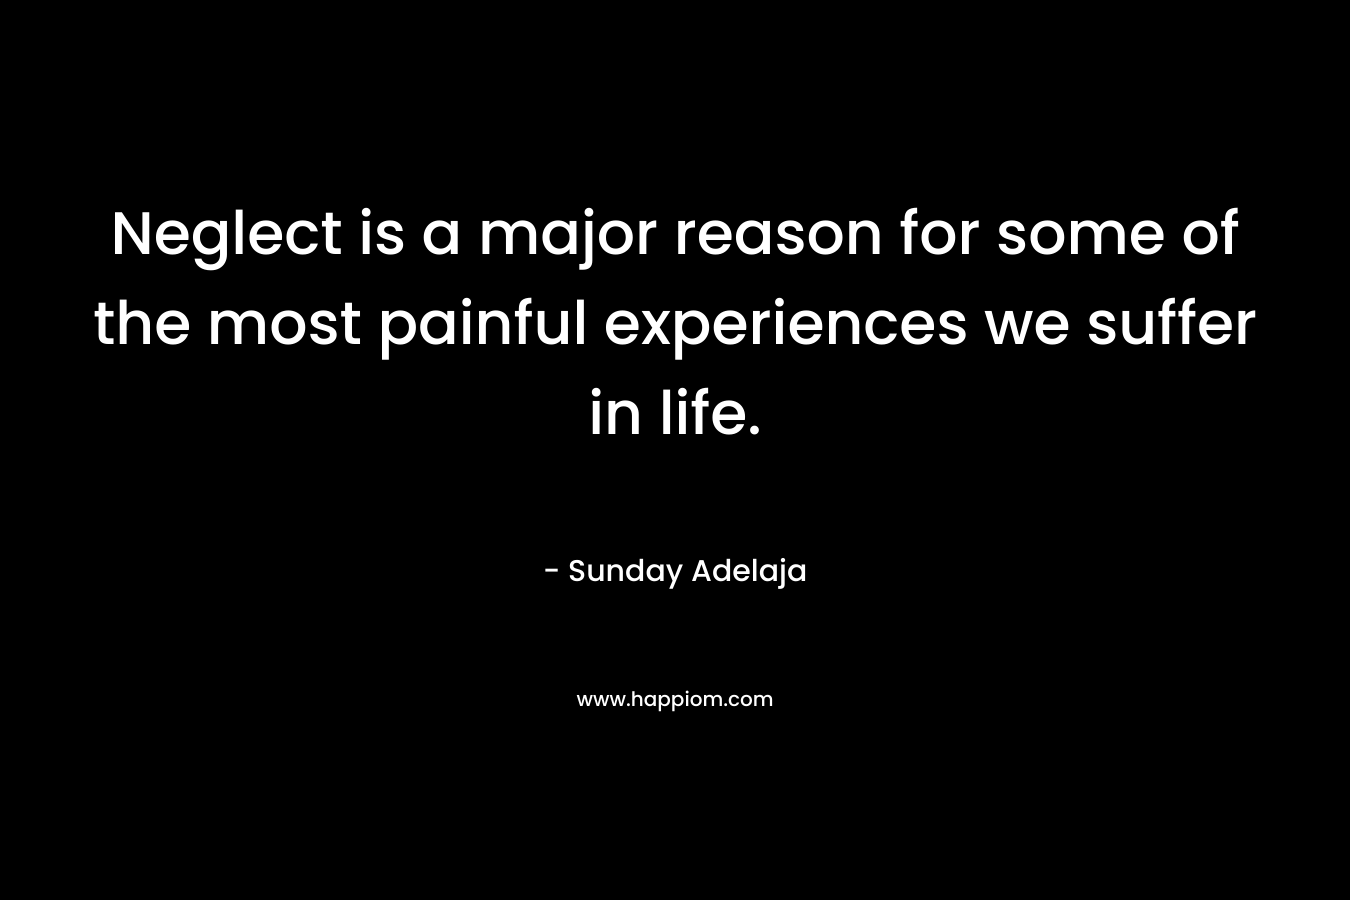 Neglect is a major reason for some of the most painful experiences we suffer in life. – Sunday Adelaja